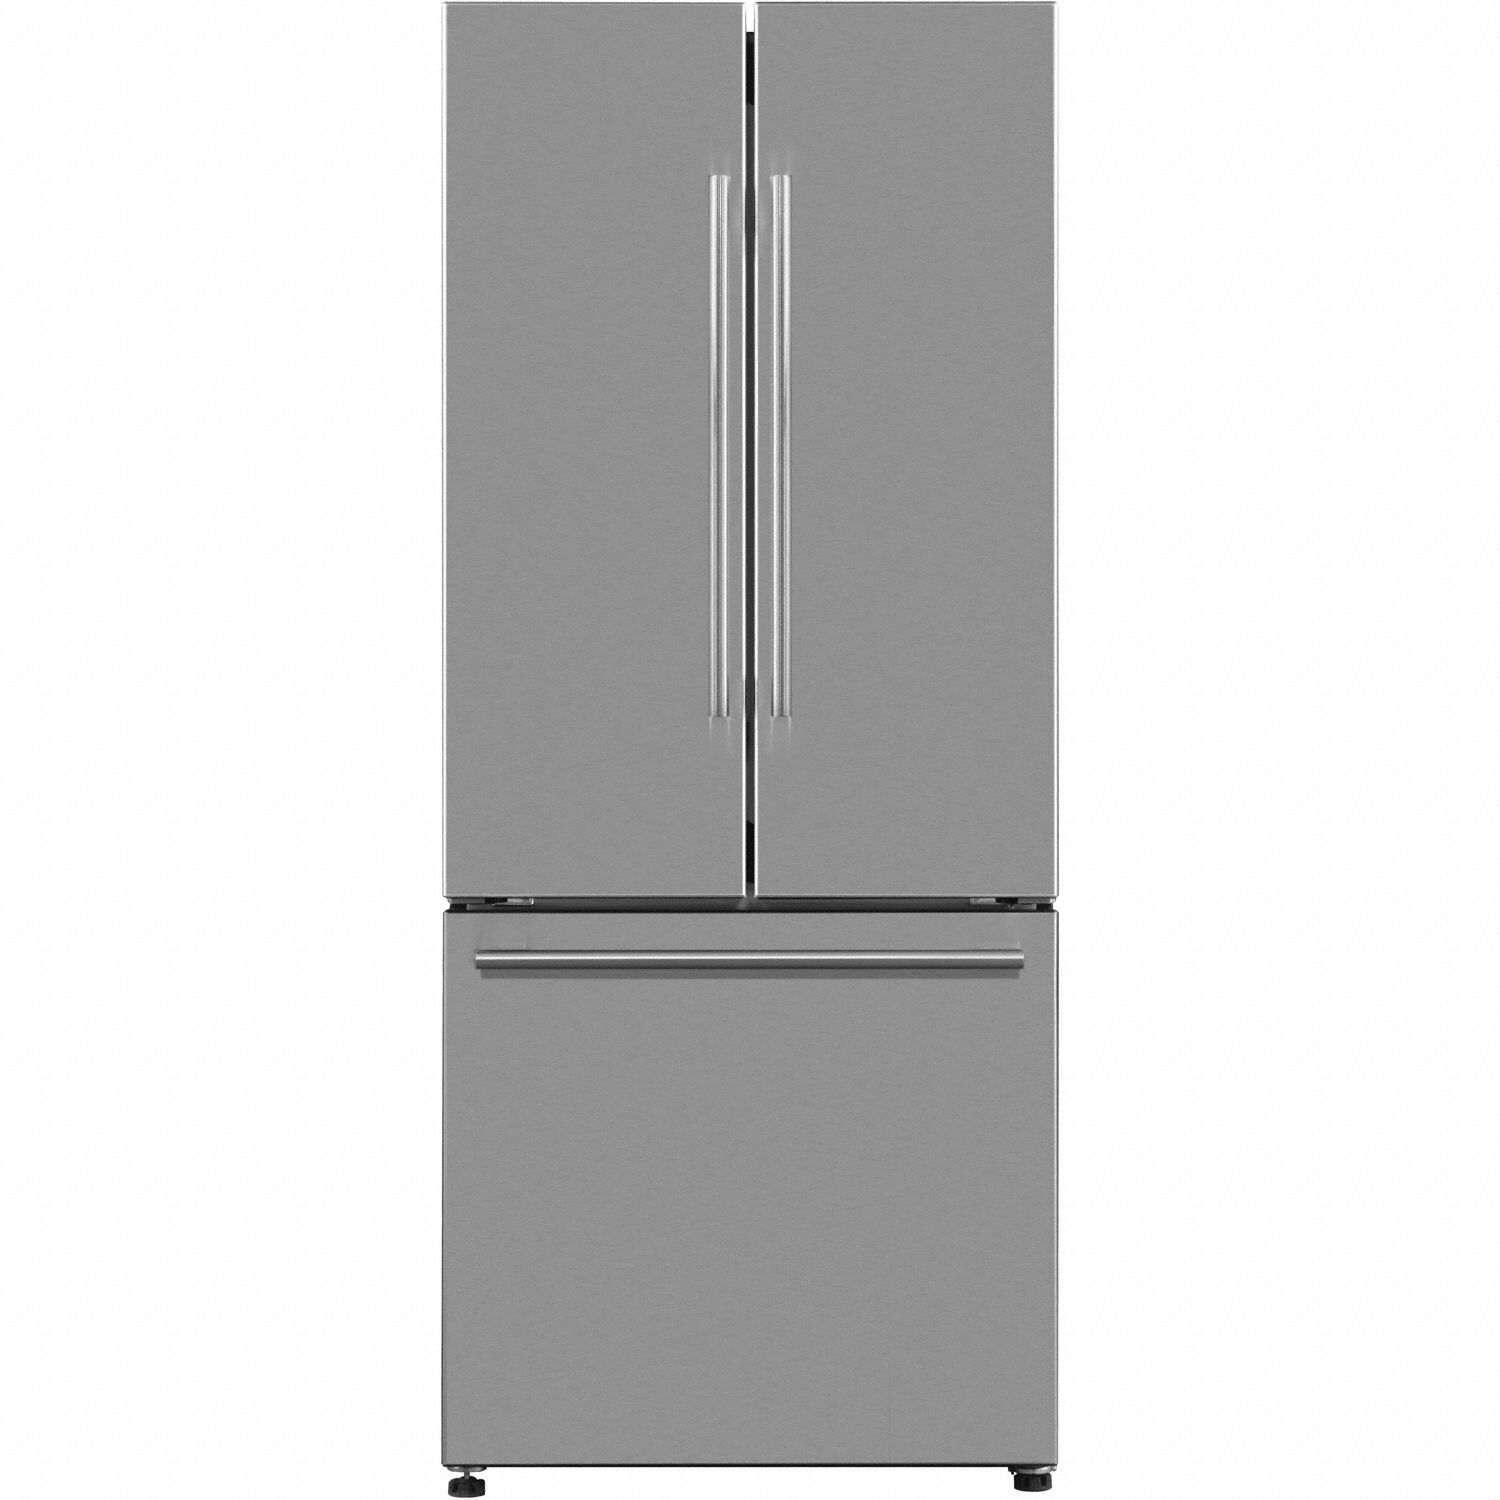 French Door Refrigerator: Stainless Steel, 16 cu ft Total Capacity, 2 Shelves, 5 to 8.9 cu ft